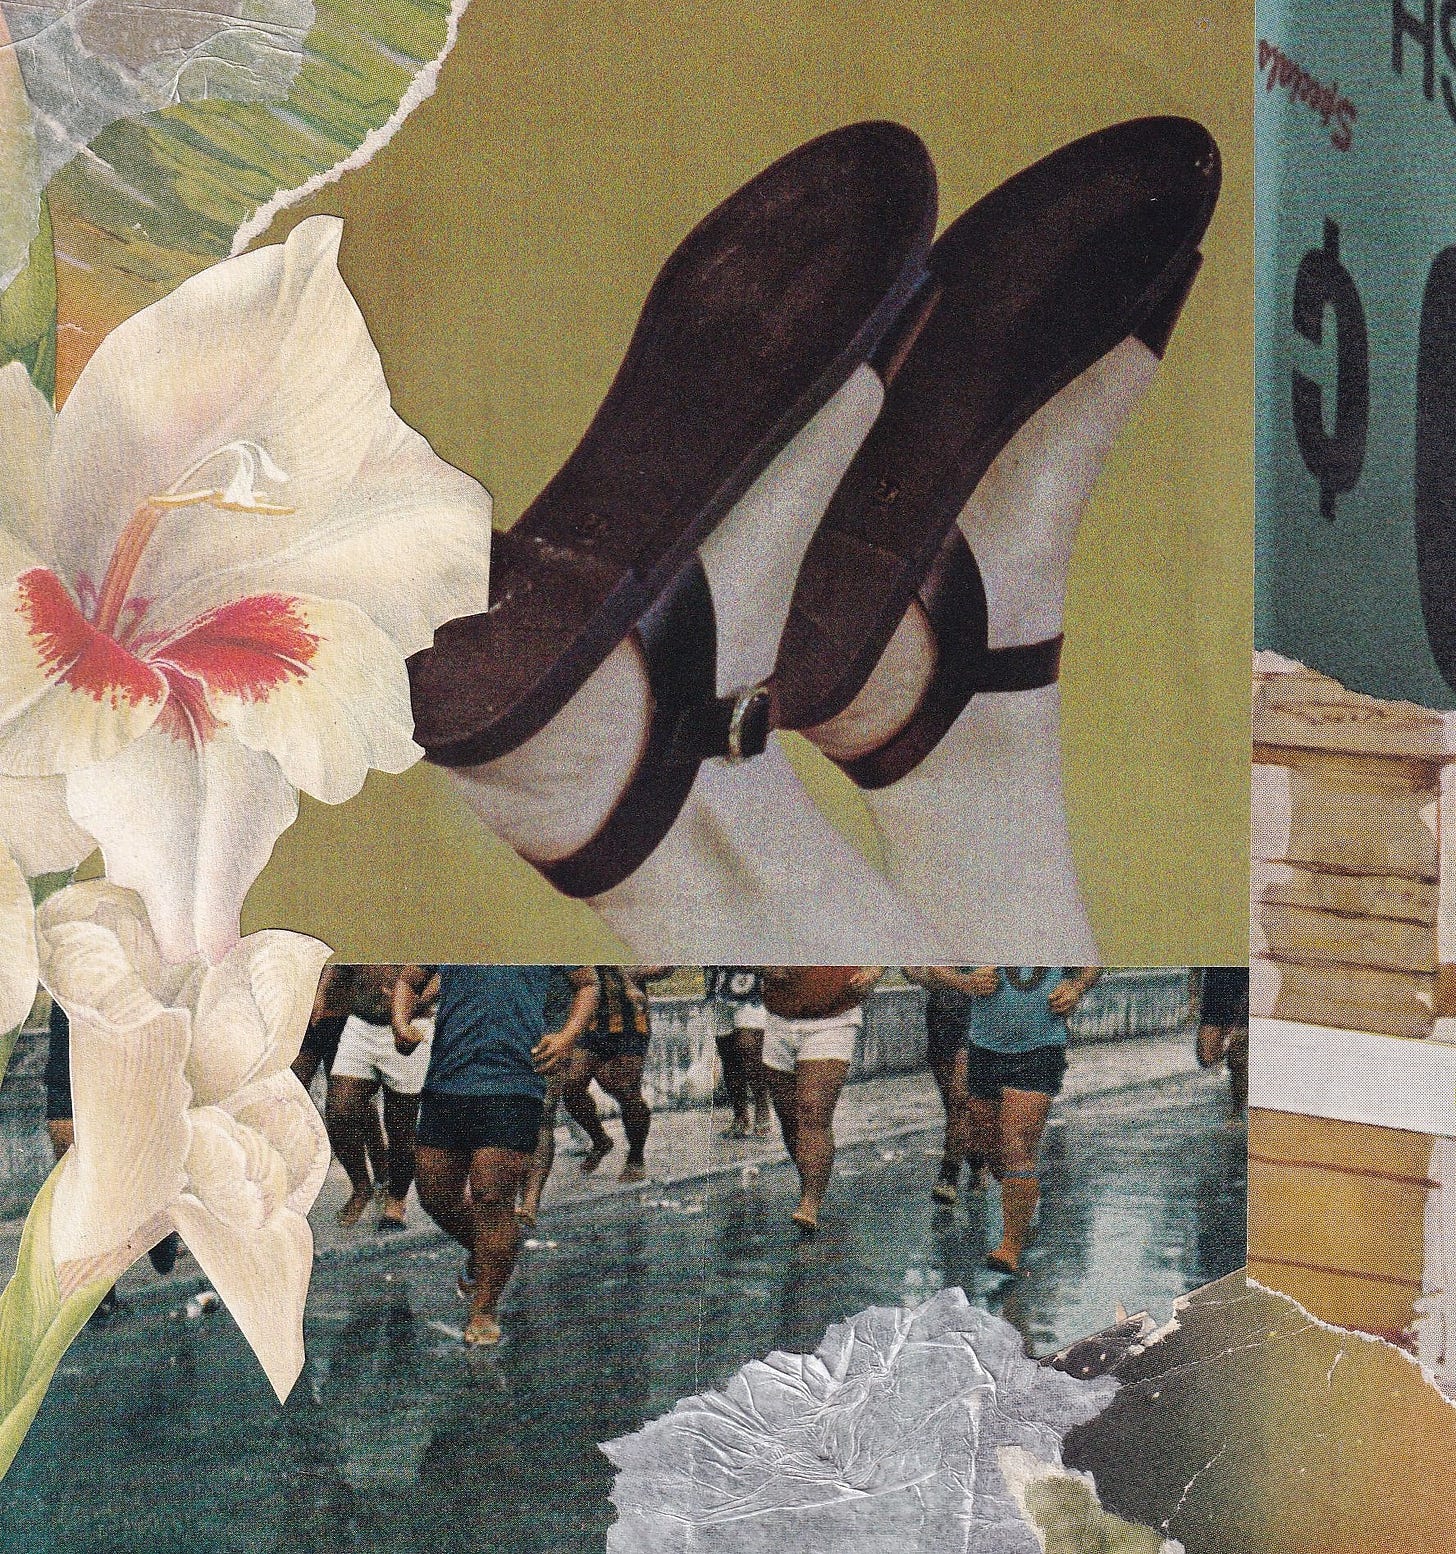 analog collage in cool greens and muted turquoise colors; at top is a pair of feet in sandals pointing toward the sky, and at bottom there is an image of a race being run. all are overlaid with scraps and ephemera for an abstract analog collage.